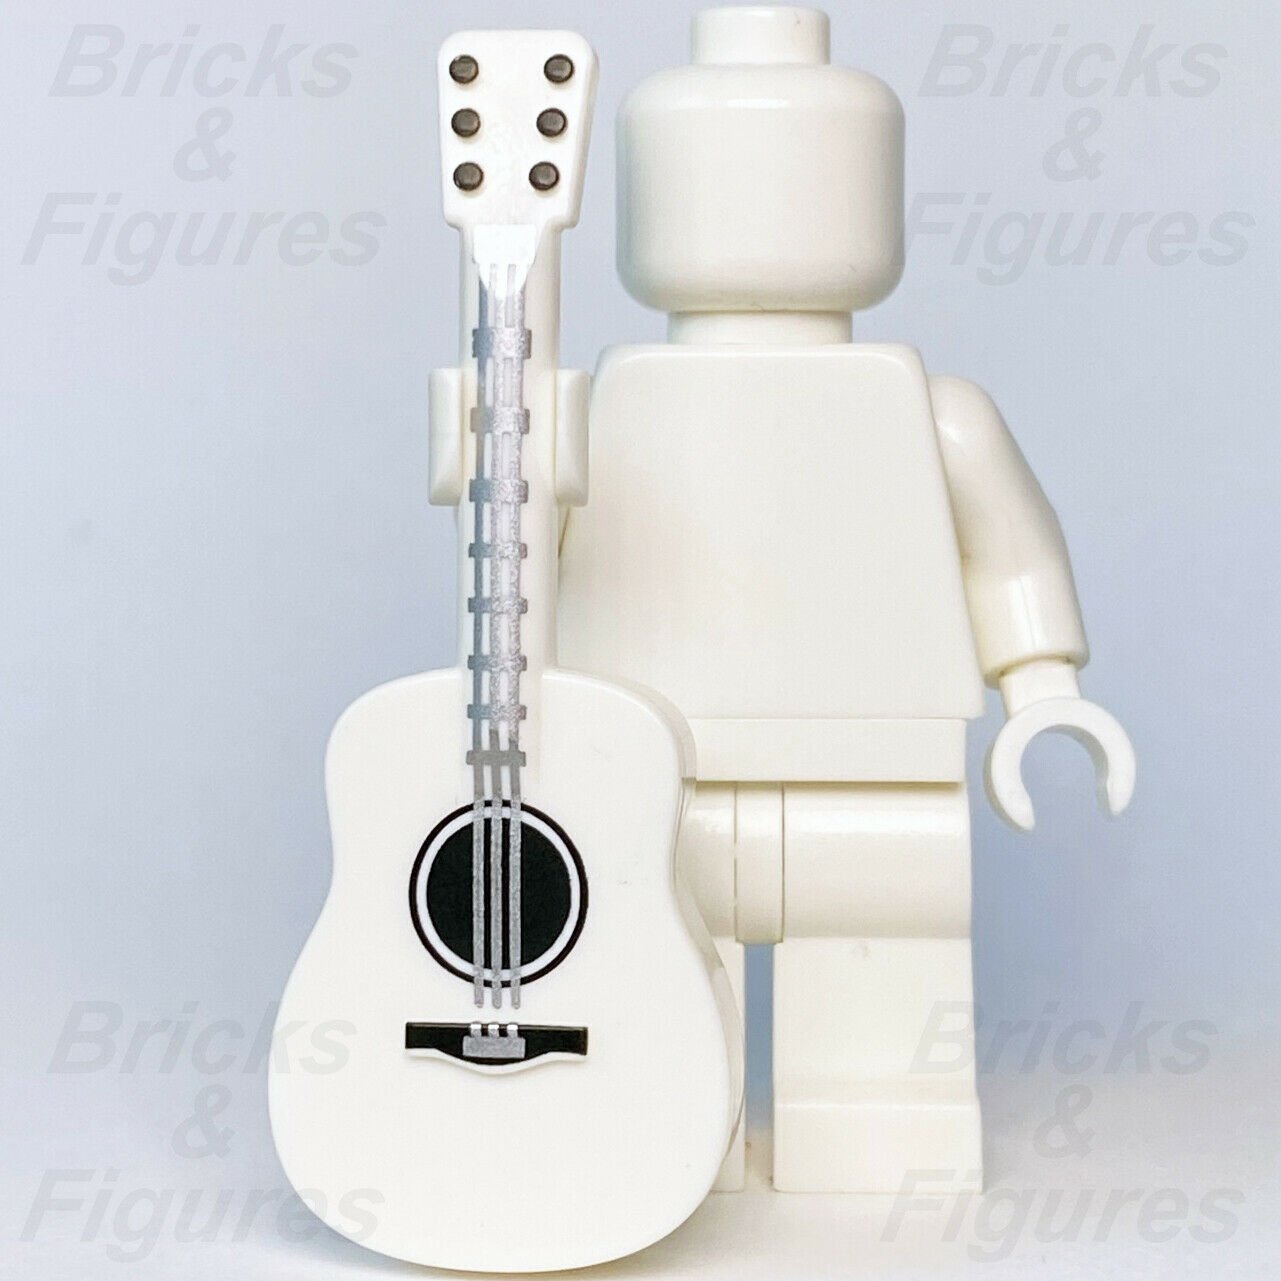 New Ninjago LEGO White Acoustic Guitar with Silver Strings Part 71735 21317 - Bricks & Figures